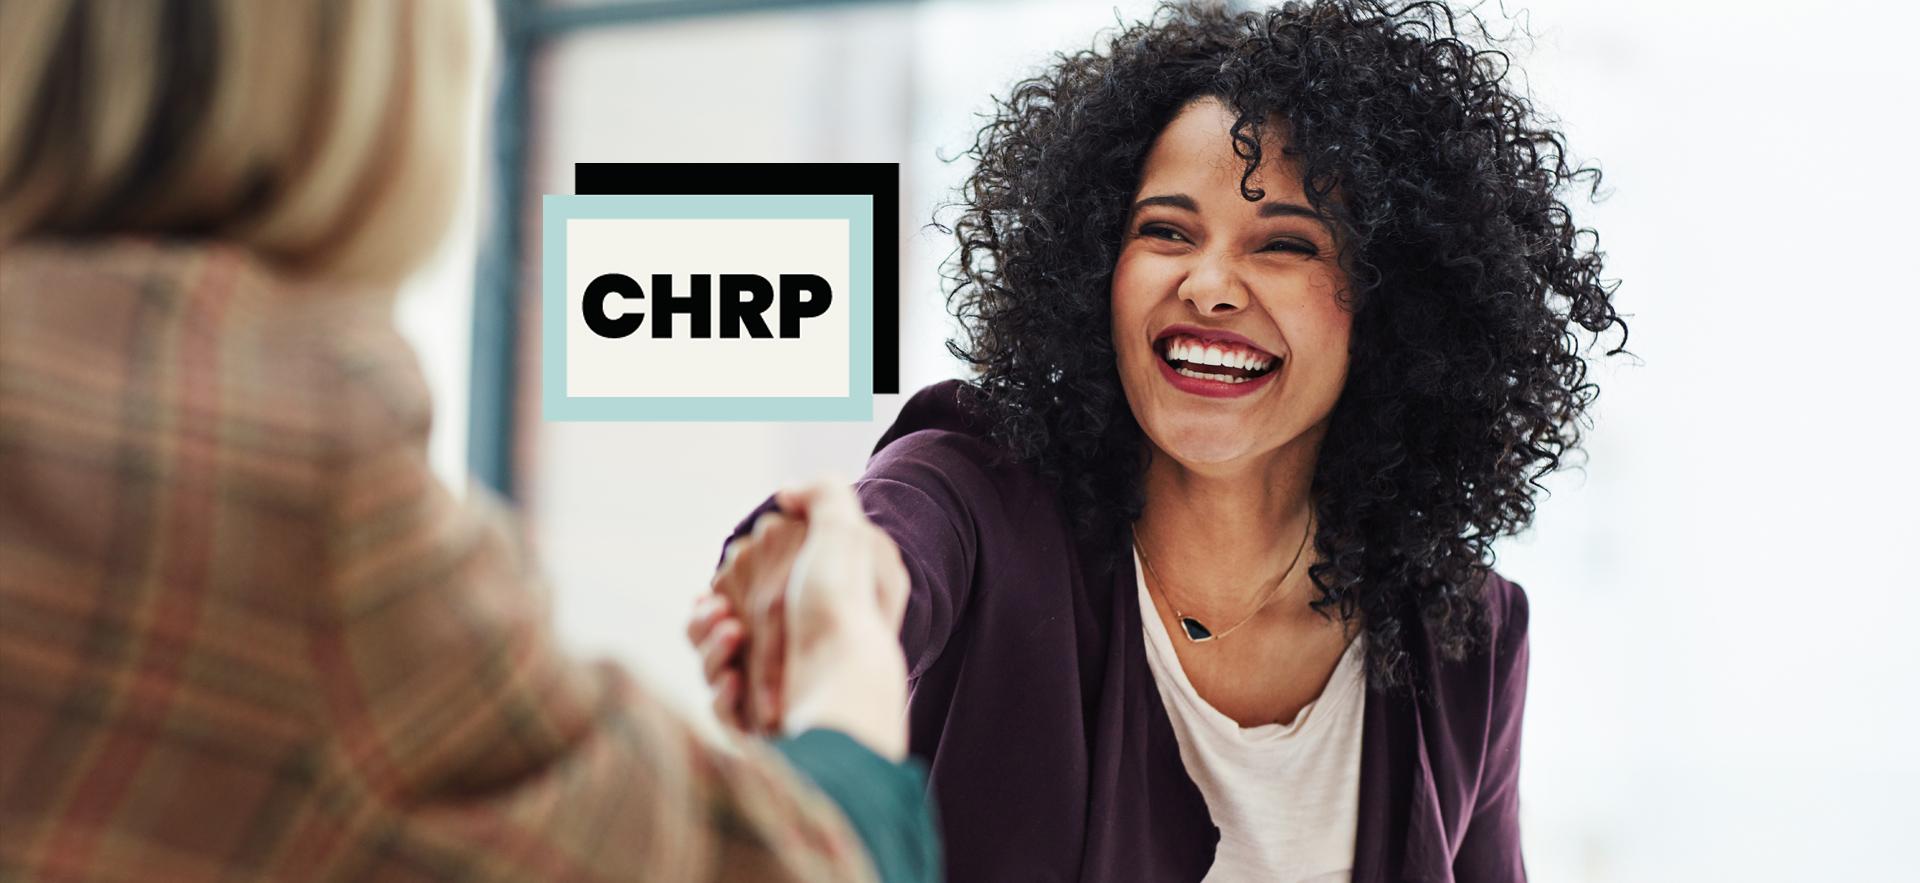 CHRP logo over image of woman smiling and shaking someone's hand